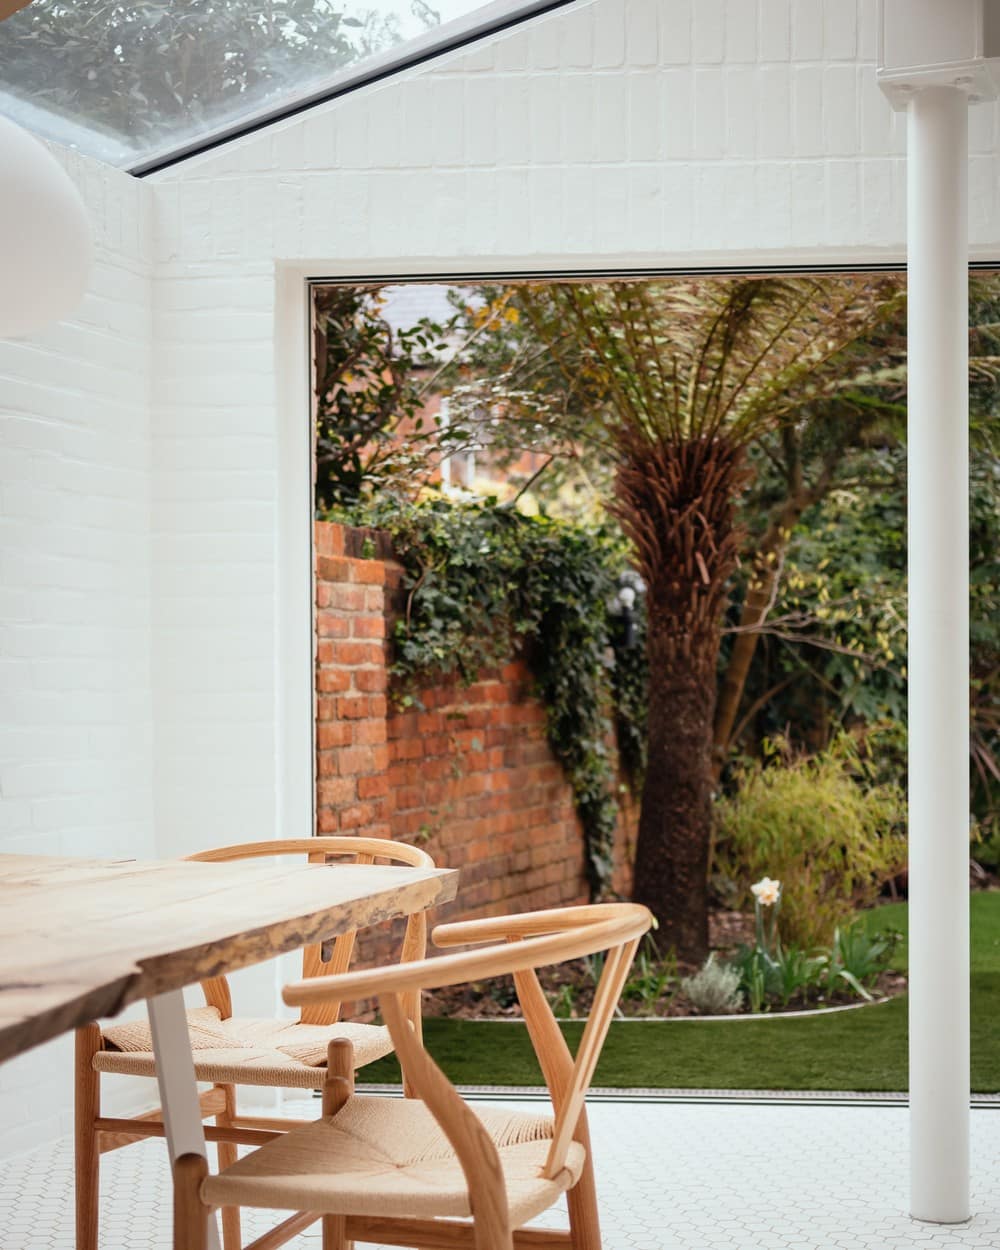 Wraparound Single-Storey Extension to a Victorian Terraced House in North London